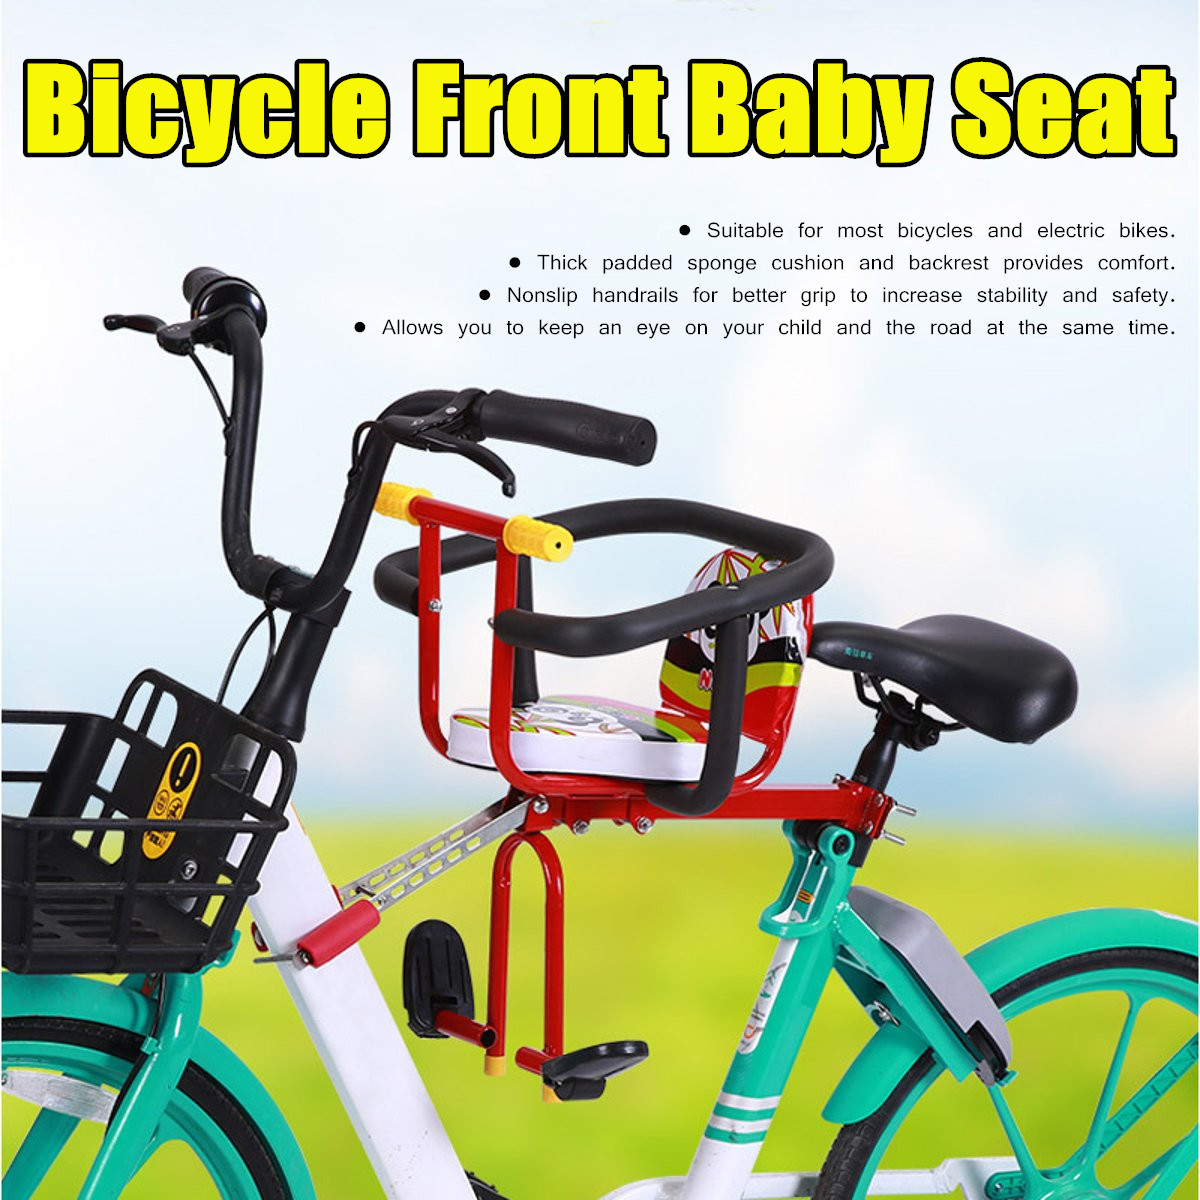 Child-Bicycle-Seat-Safety-Kids-Front-Baby-Saddle-Cushion-Bike-Carrier-Handrails-1768913-1